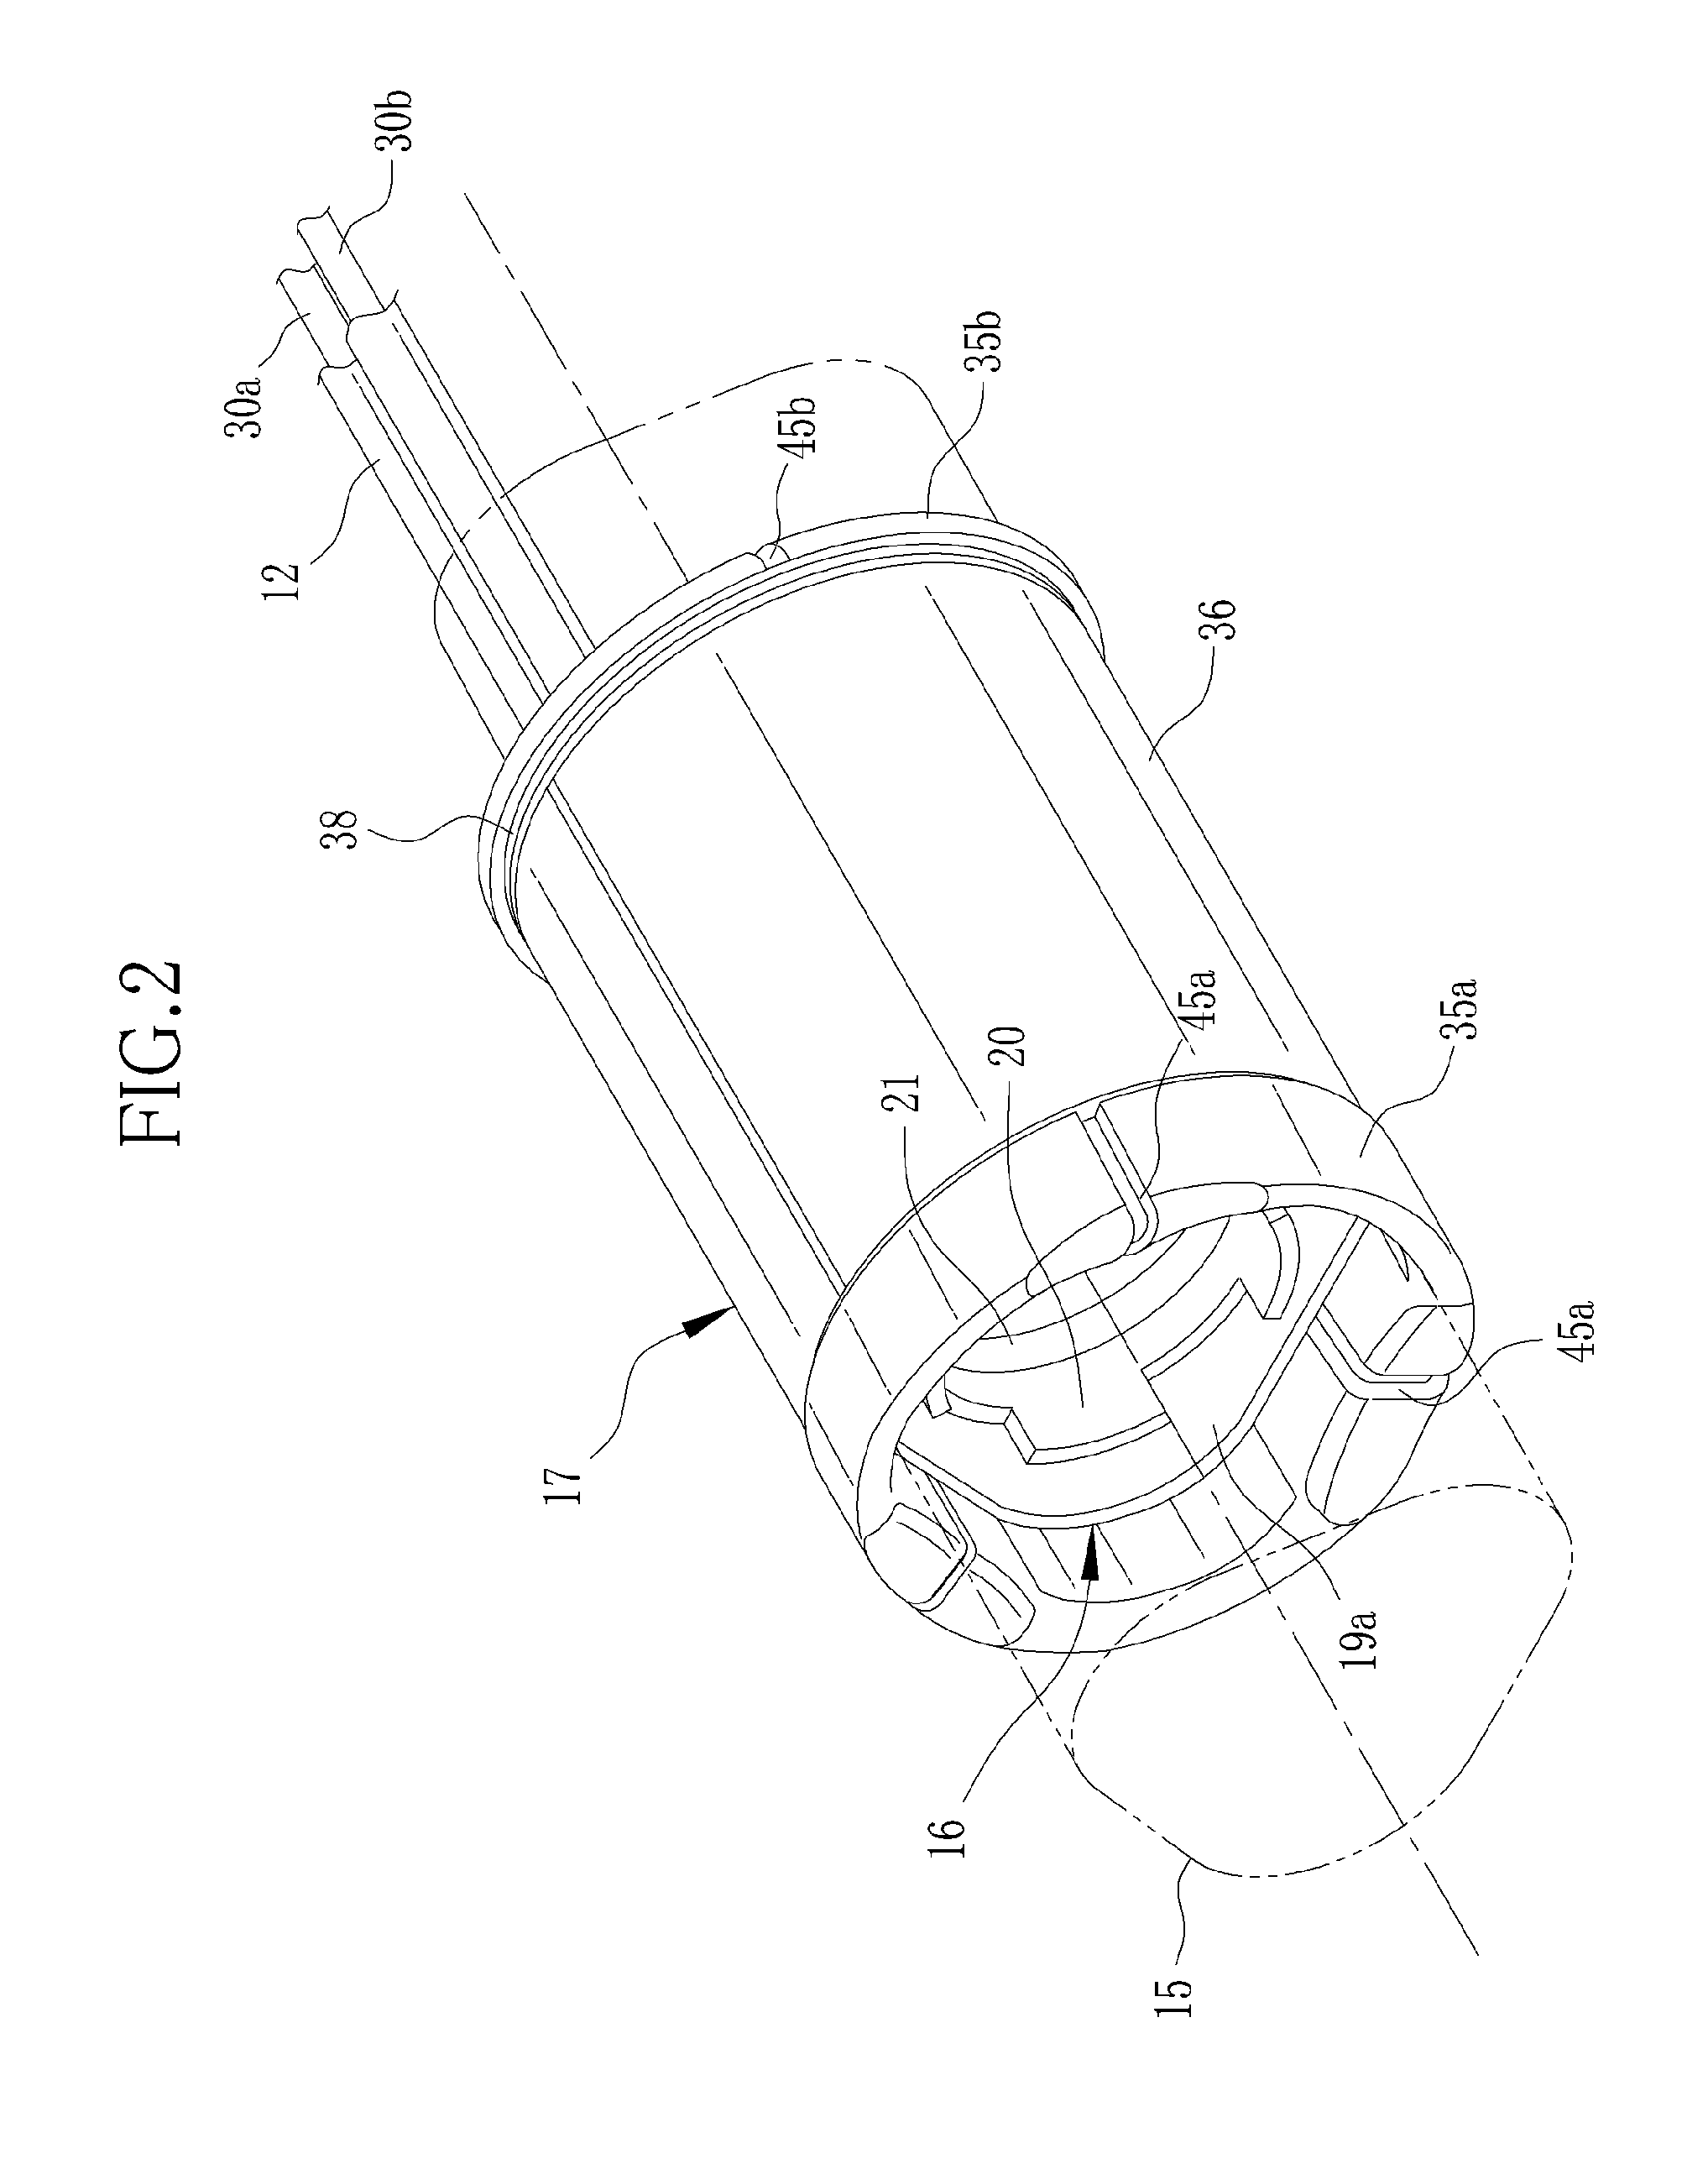 Propulsion assembly for endoscope